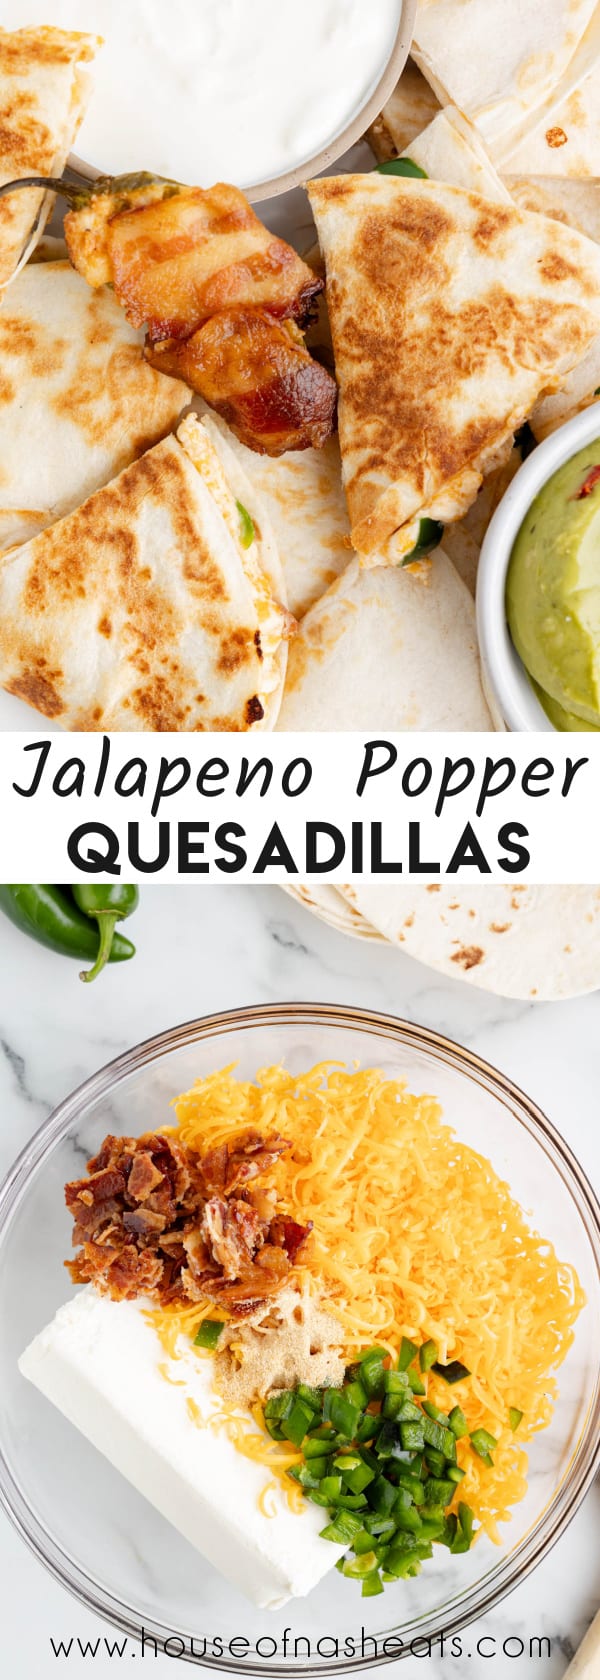 A collage of images of jalapeno popper quesadillas with text overlay.